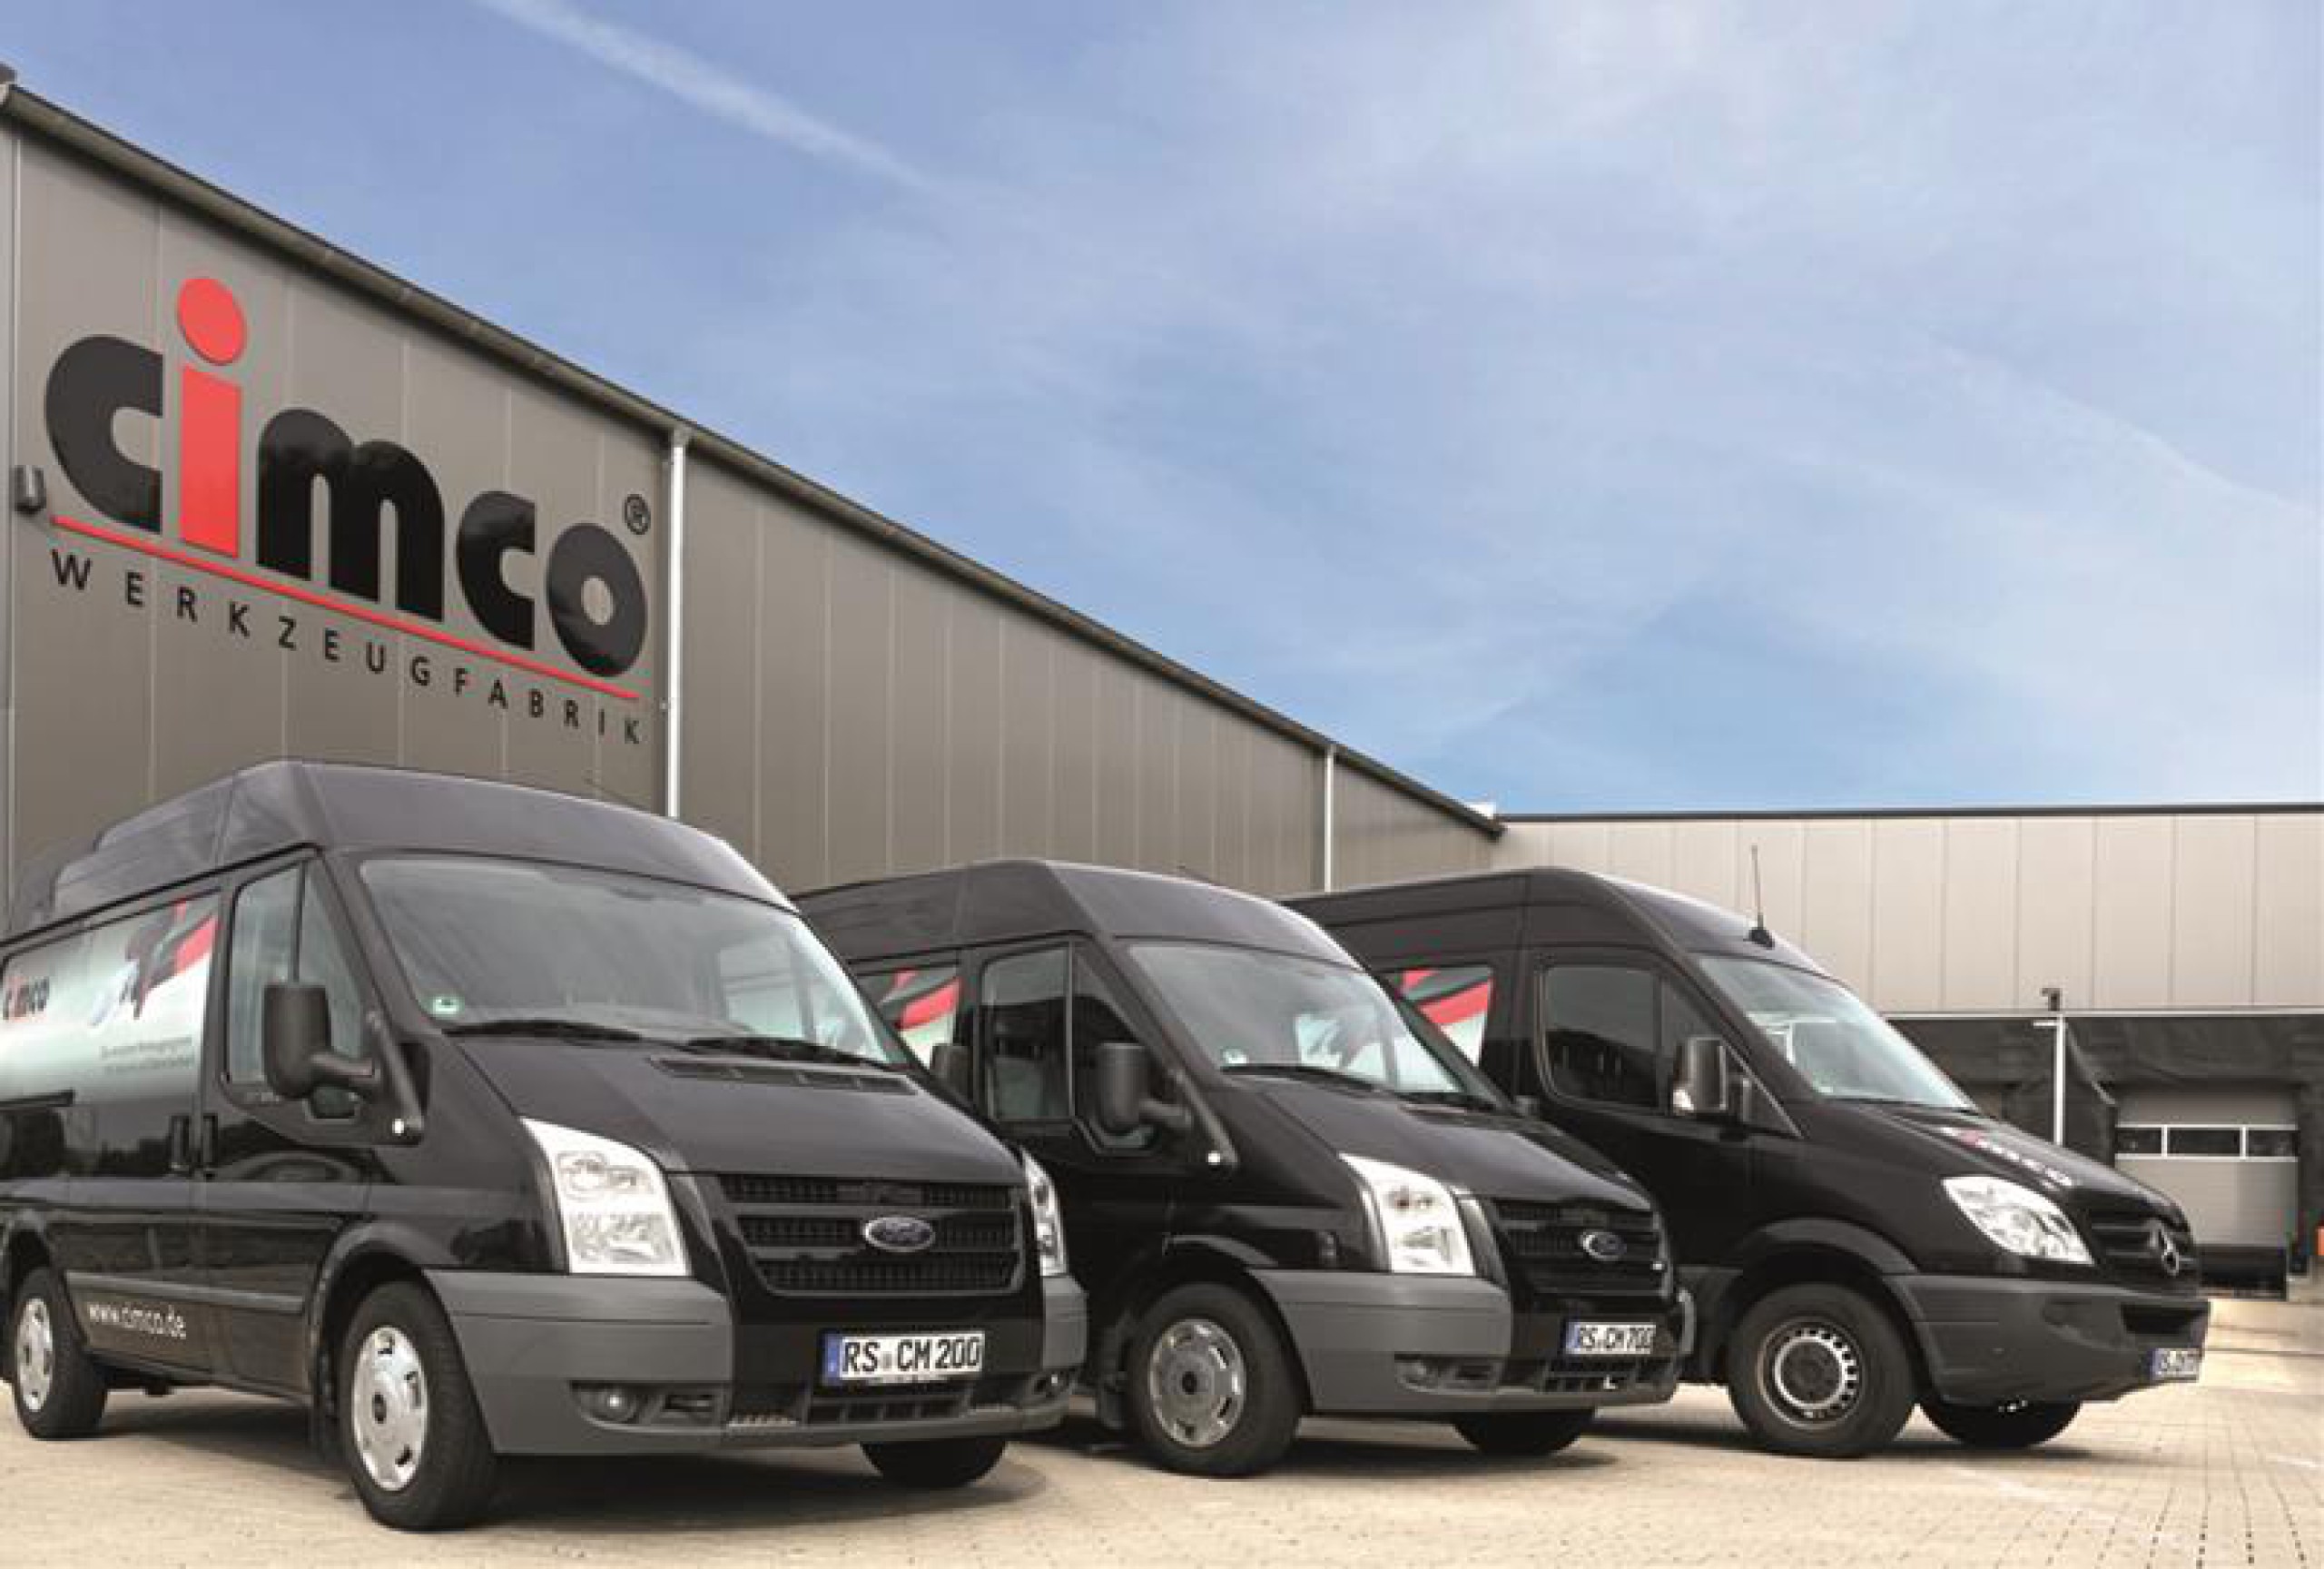 Cimco building and company vans